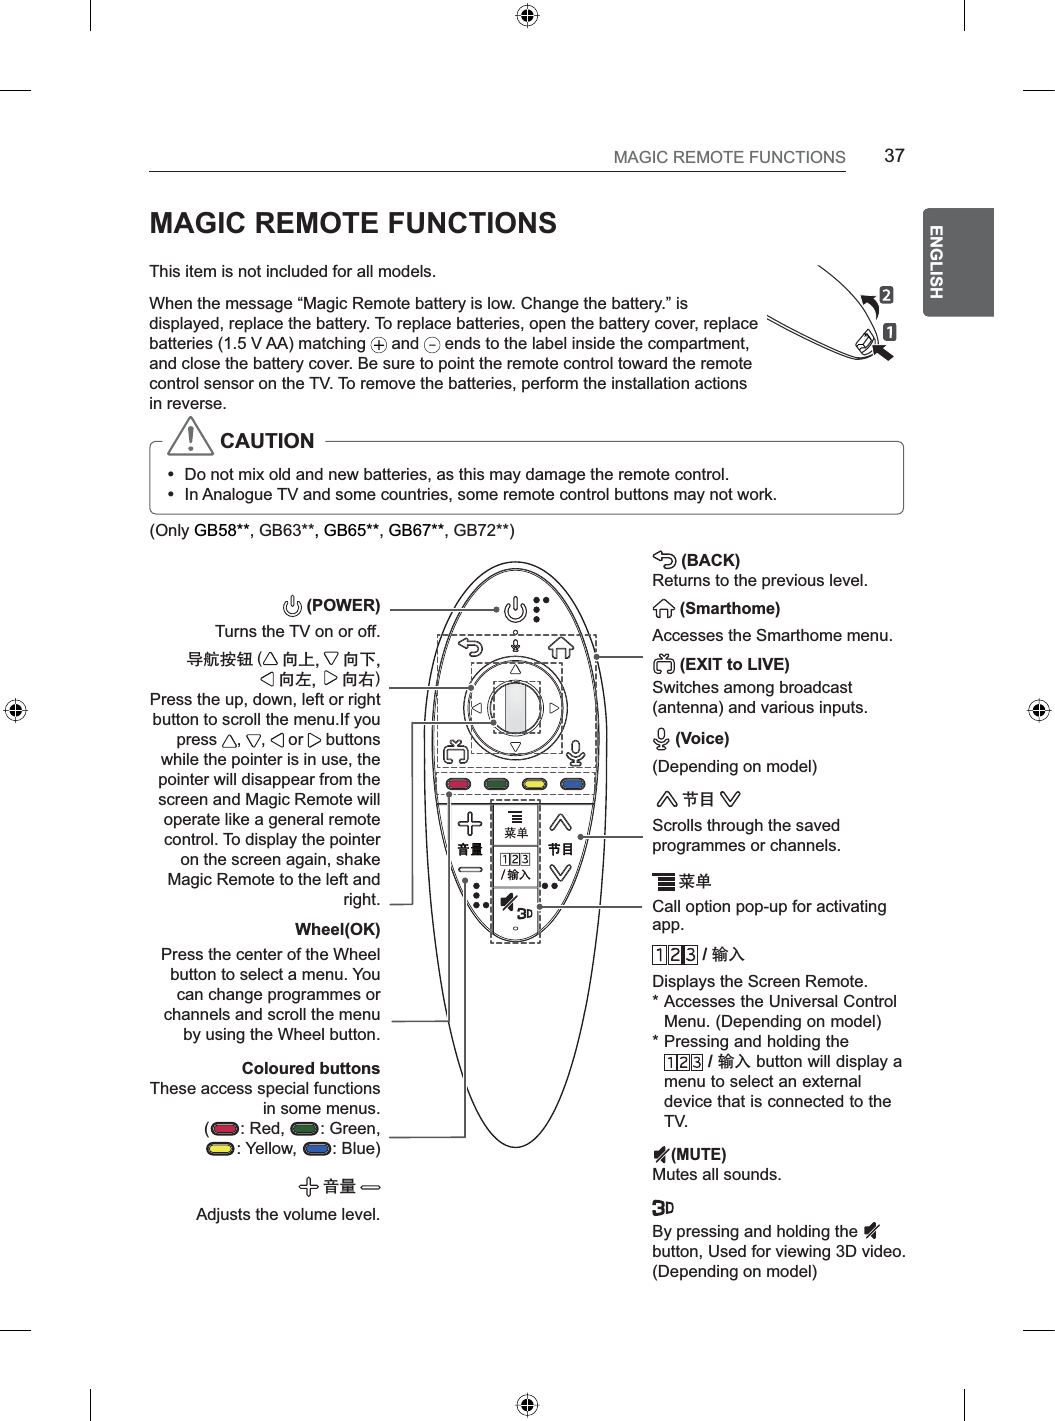 37ENGENGLISHMAGIC REMOTE FUNCTIONSMAGIC REMOTE FUNCTIONSThis item is not included for all models.When the message “Magic Remote battery is low. Change the battery.” is displayed, replace the battery. To replace batteries, open the battery cover, replace batteries (1.5 V AA) matching   and   ends to the label inside the compartment, and close the battery cover. Be sure to point the remote control toward the remote control sensor on the TV. To remove the batteries, perform the installation actions in reverse. CAUTIONyDo not mix old and new batteries, as this may damage the remote control.yIn Analogue TV and some countries, some remote control buttons may not work.(Only GB58**, GB63**, GB65**,GB67**, GB72**) (POWER) Turns the TV on or off.᫏䃽⇜厁 ዤೝ ዤೞዤᲹ ዤ዆Press the up, down, left or right button to scroll the menu.If you press , ,  or   buttons while the pointer is in use, the pointer will disappear from the screen and Magic Remote will operate like a general remote control. To display the pointer on the screen again, shake Magic Remote to the left and right.Wheel(OK)Press the center of the Wheel button to select a menu. You can change programmes or channels and scroll the menu by using the Wheel button.Coloured buttons   These access special functions in some menus.(: Red,  : Green, : Yellow,  : Blue)囆傢Adjusts the volume level. (BACK) Returns to the previous level. (Smarthome)Accesses the Smarthome menu. (EXIT to LIVE)   Switches among broadcast (antenna) and various inputs. (Voice) (Depending on model)䅕㗁Scrolls through the saved programmes or channels.䊯ረCall option pop-up for activating app. / 书းDisplays the Screen Remote.* Accesses the Universal Control Menu. (Depending on model)* Pressing and holding the  / 书း button will display a menu to select an external device that is connected to the TV.(MUTE)Mutes all sounds. By pressing and holding the button, Used for viewing 3D video.(Depending on model)